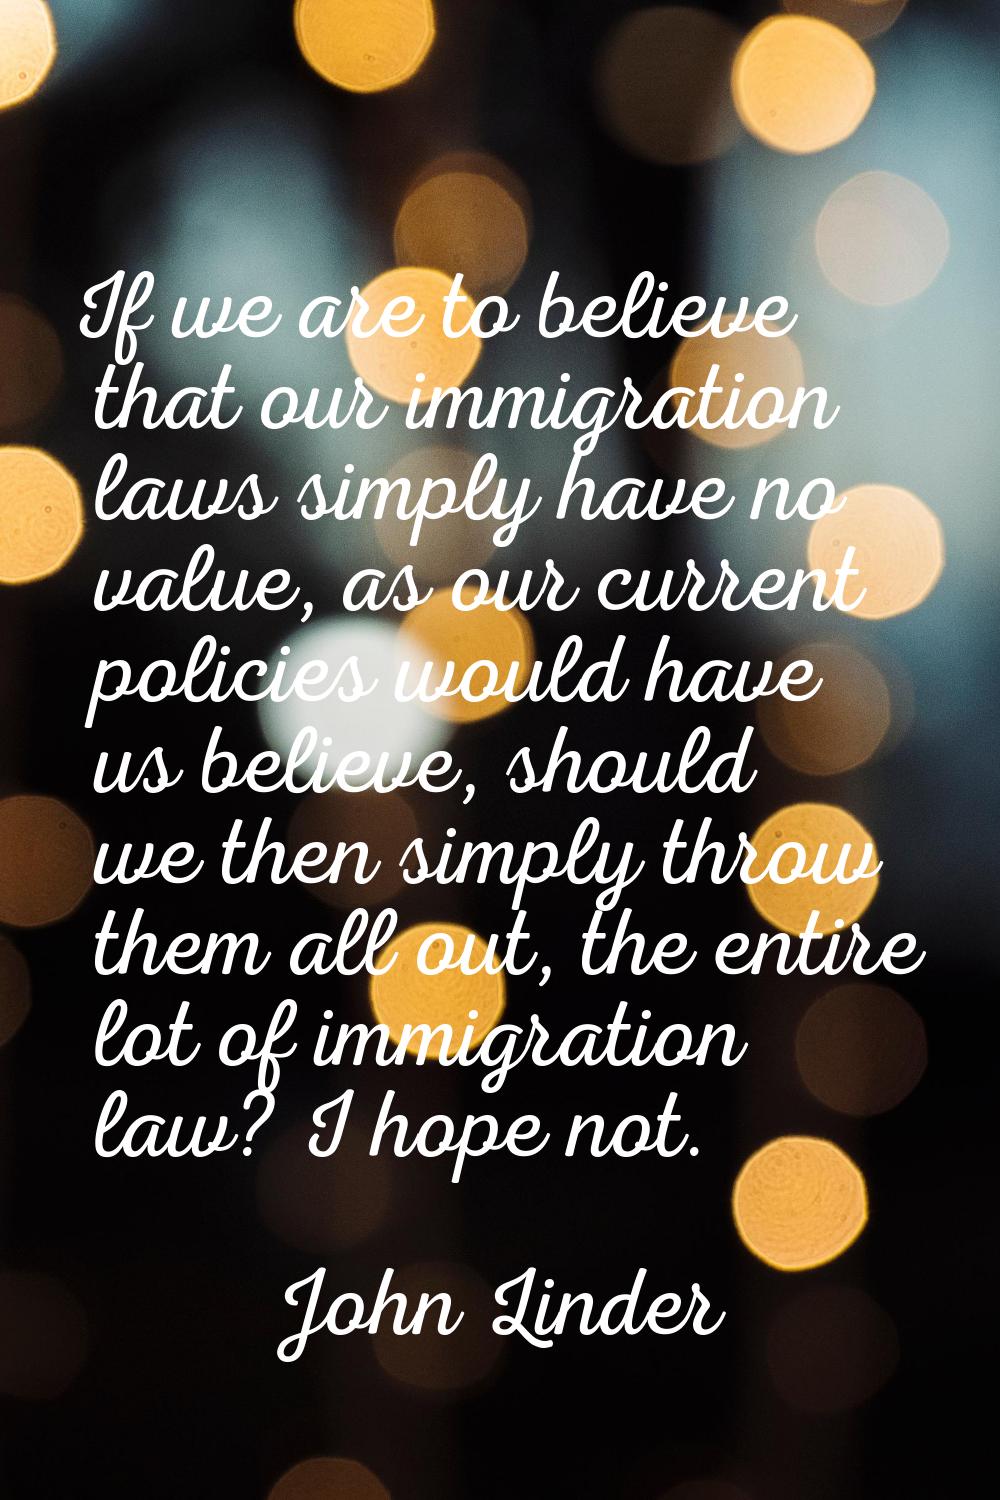 If we are to believe that our immigration laws simply have no value, as our current policies would 